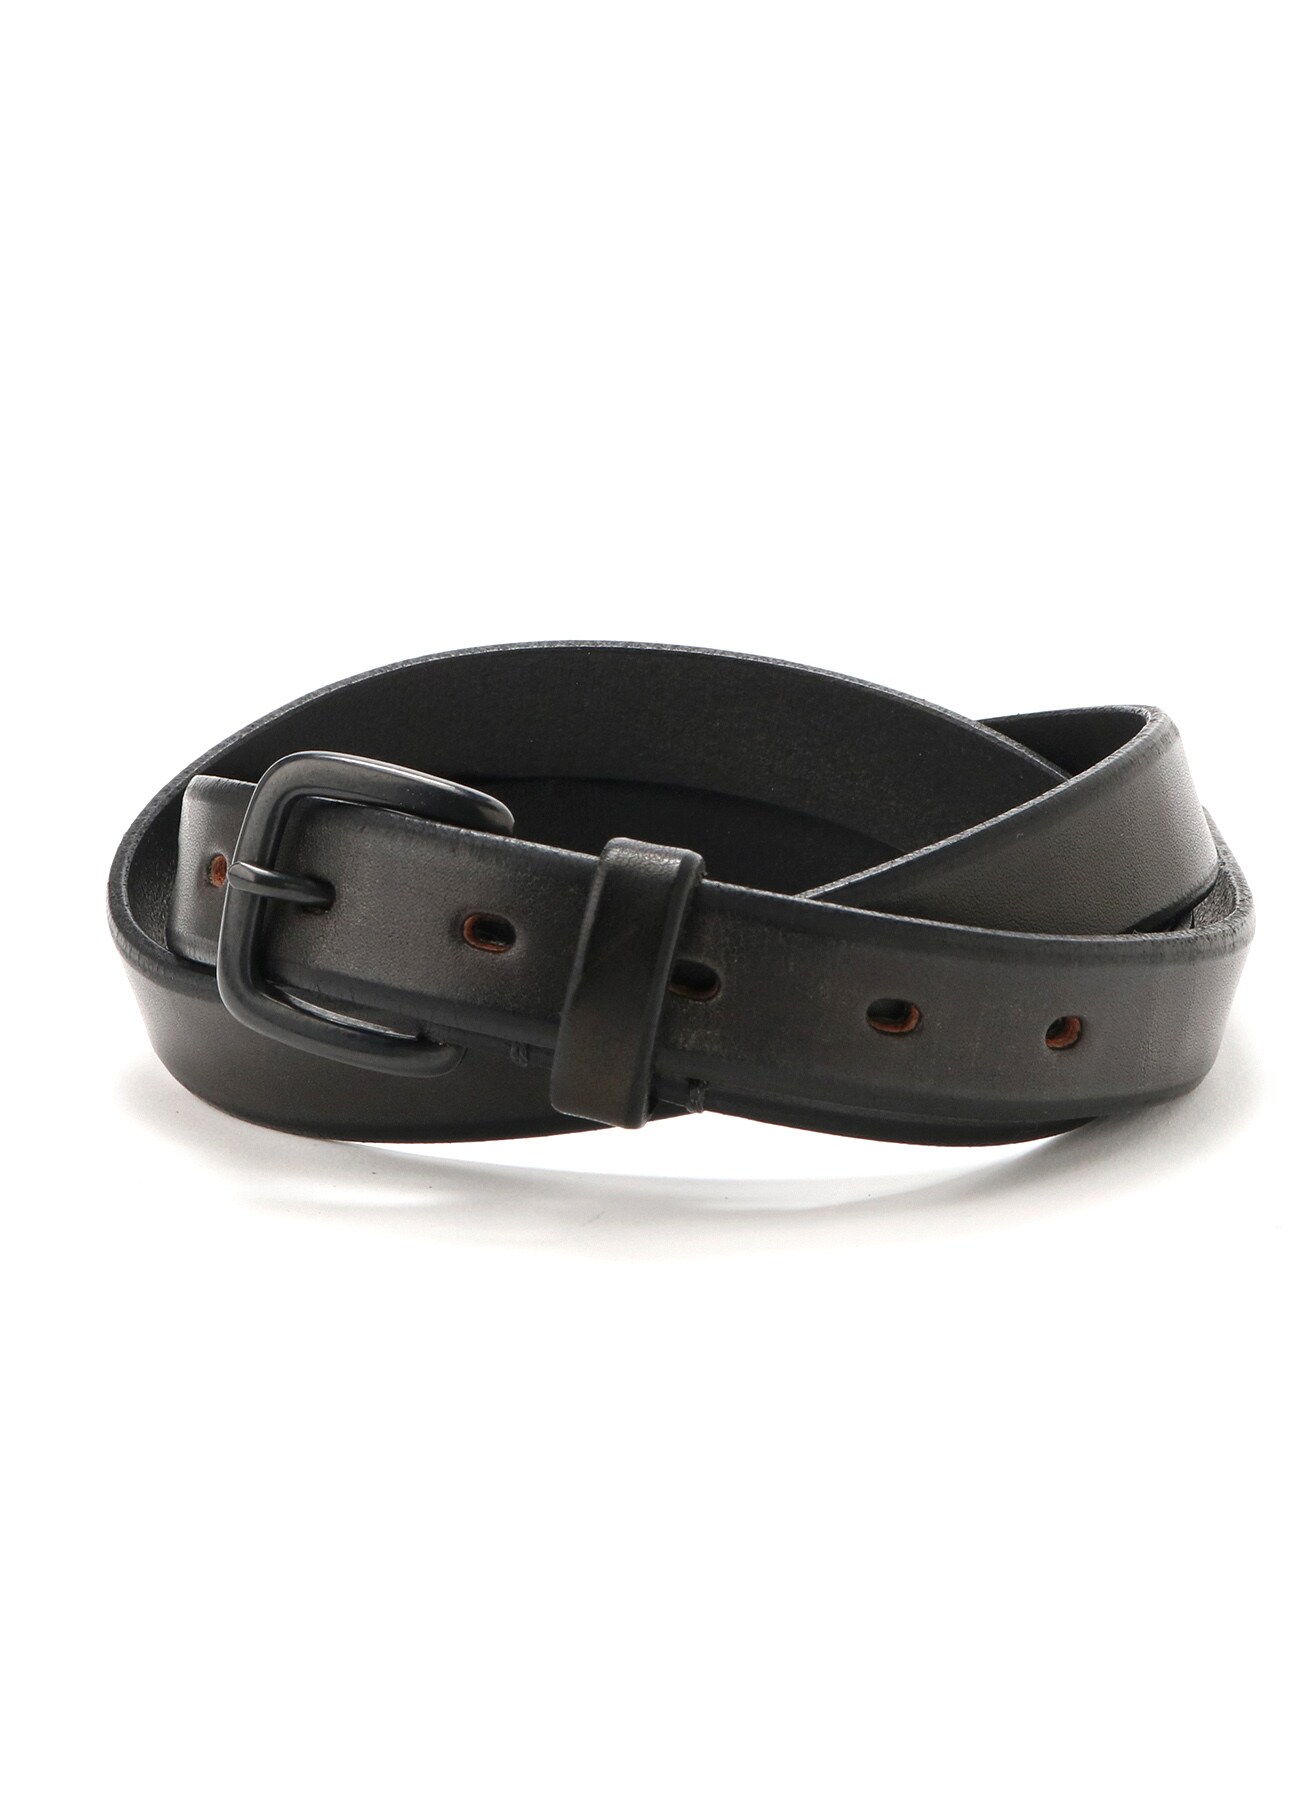 THICK LEATHER 25mm BELT